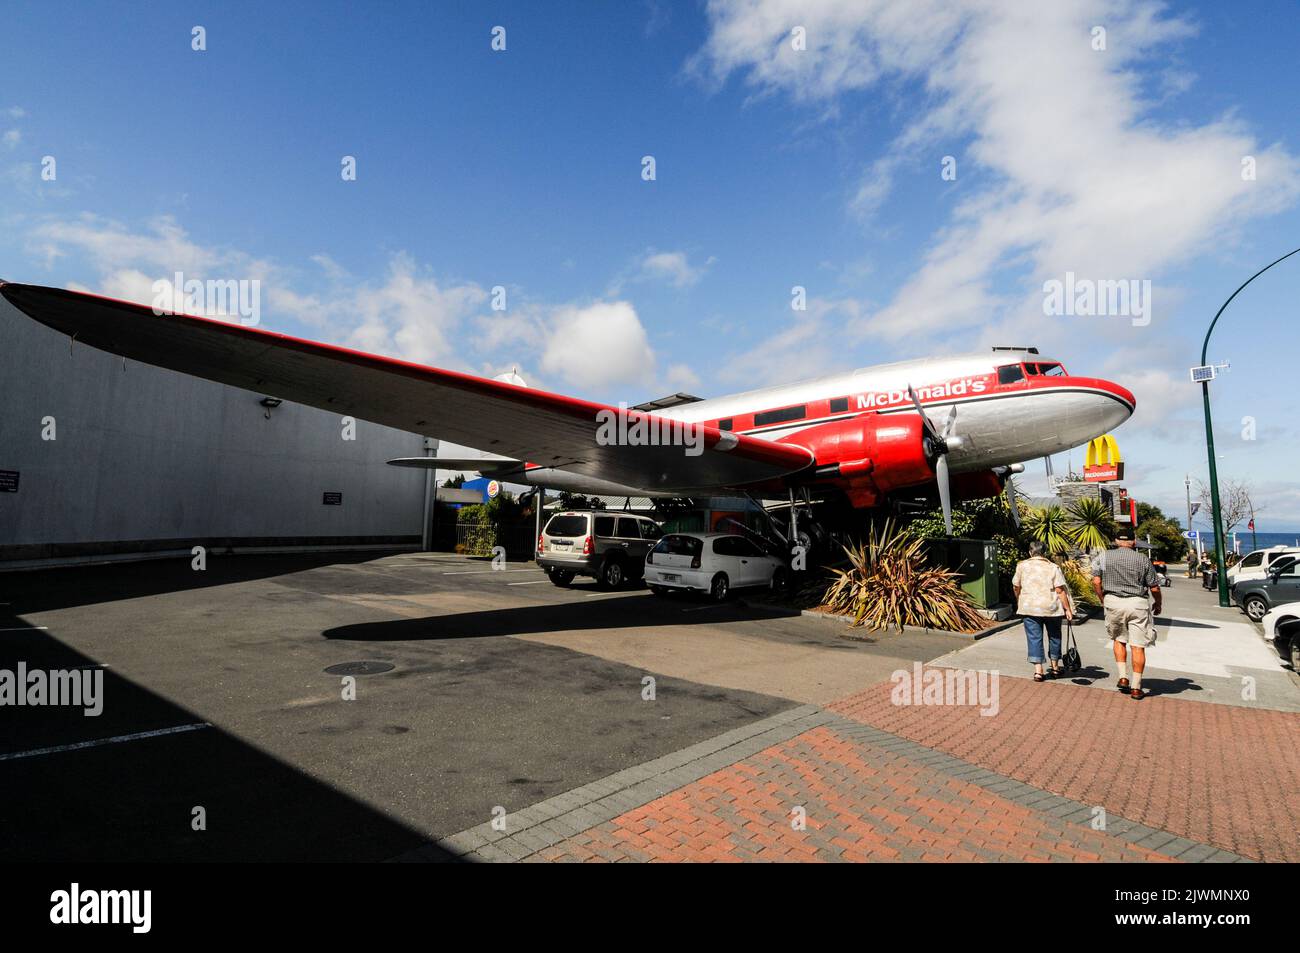 A retired McDonald DC3 now used as an extended restaurant at a McDonald's eatery in Taupo, a town near the centre of New Zealand's North Island on the Stock Photo